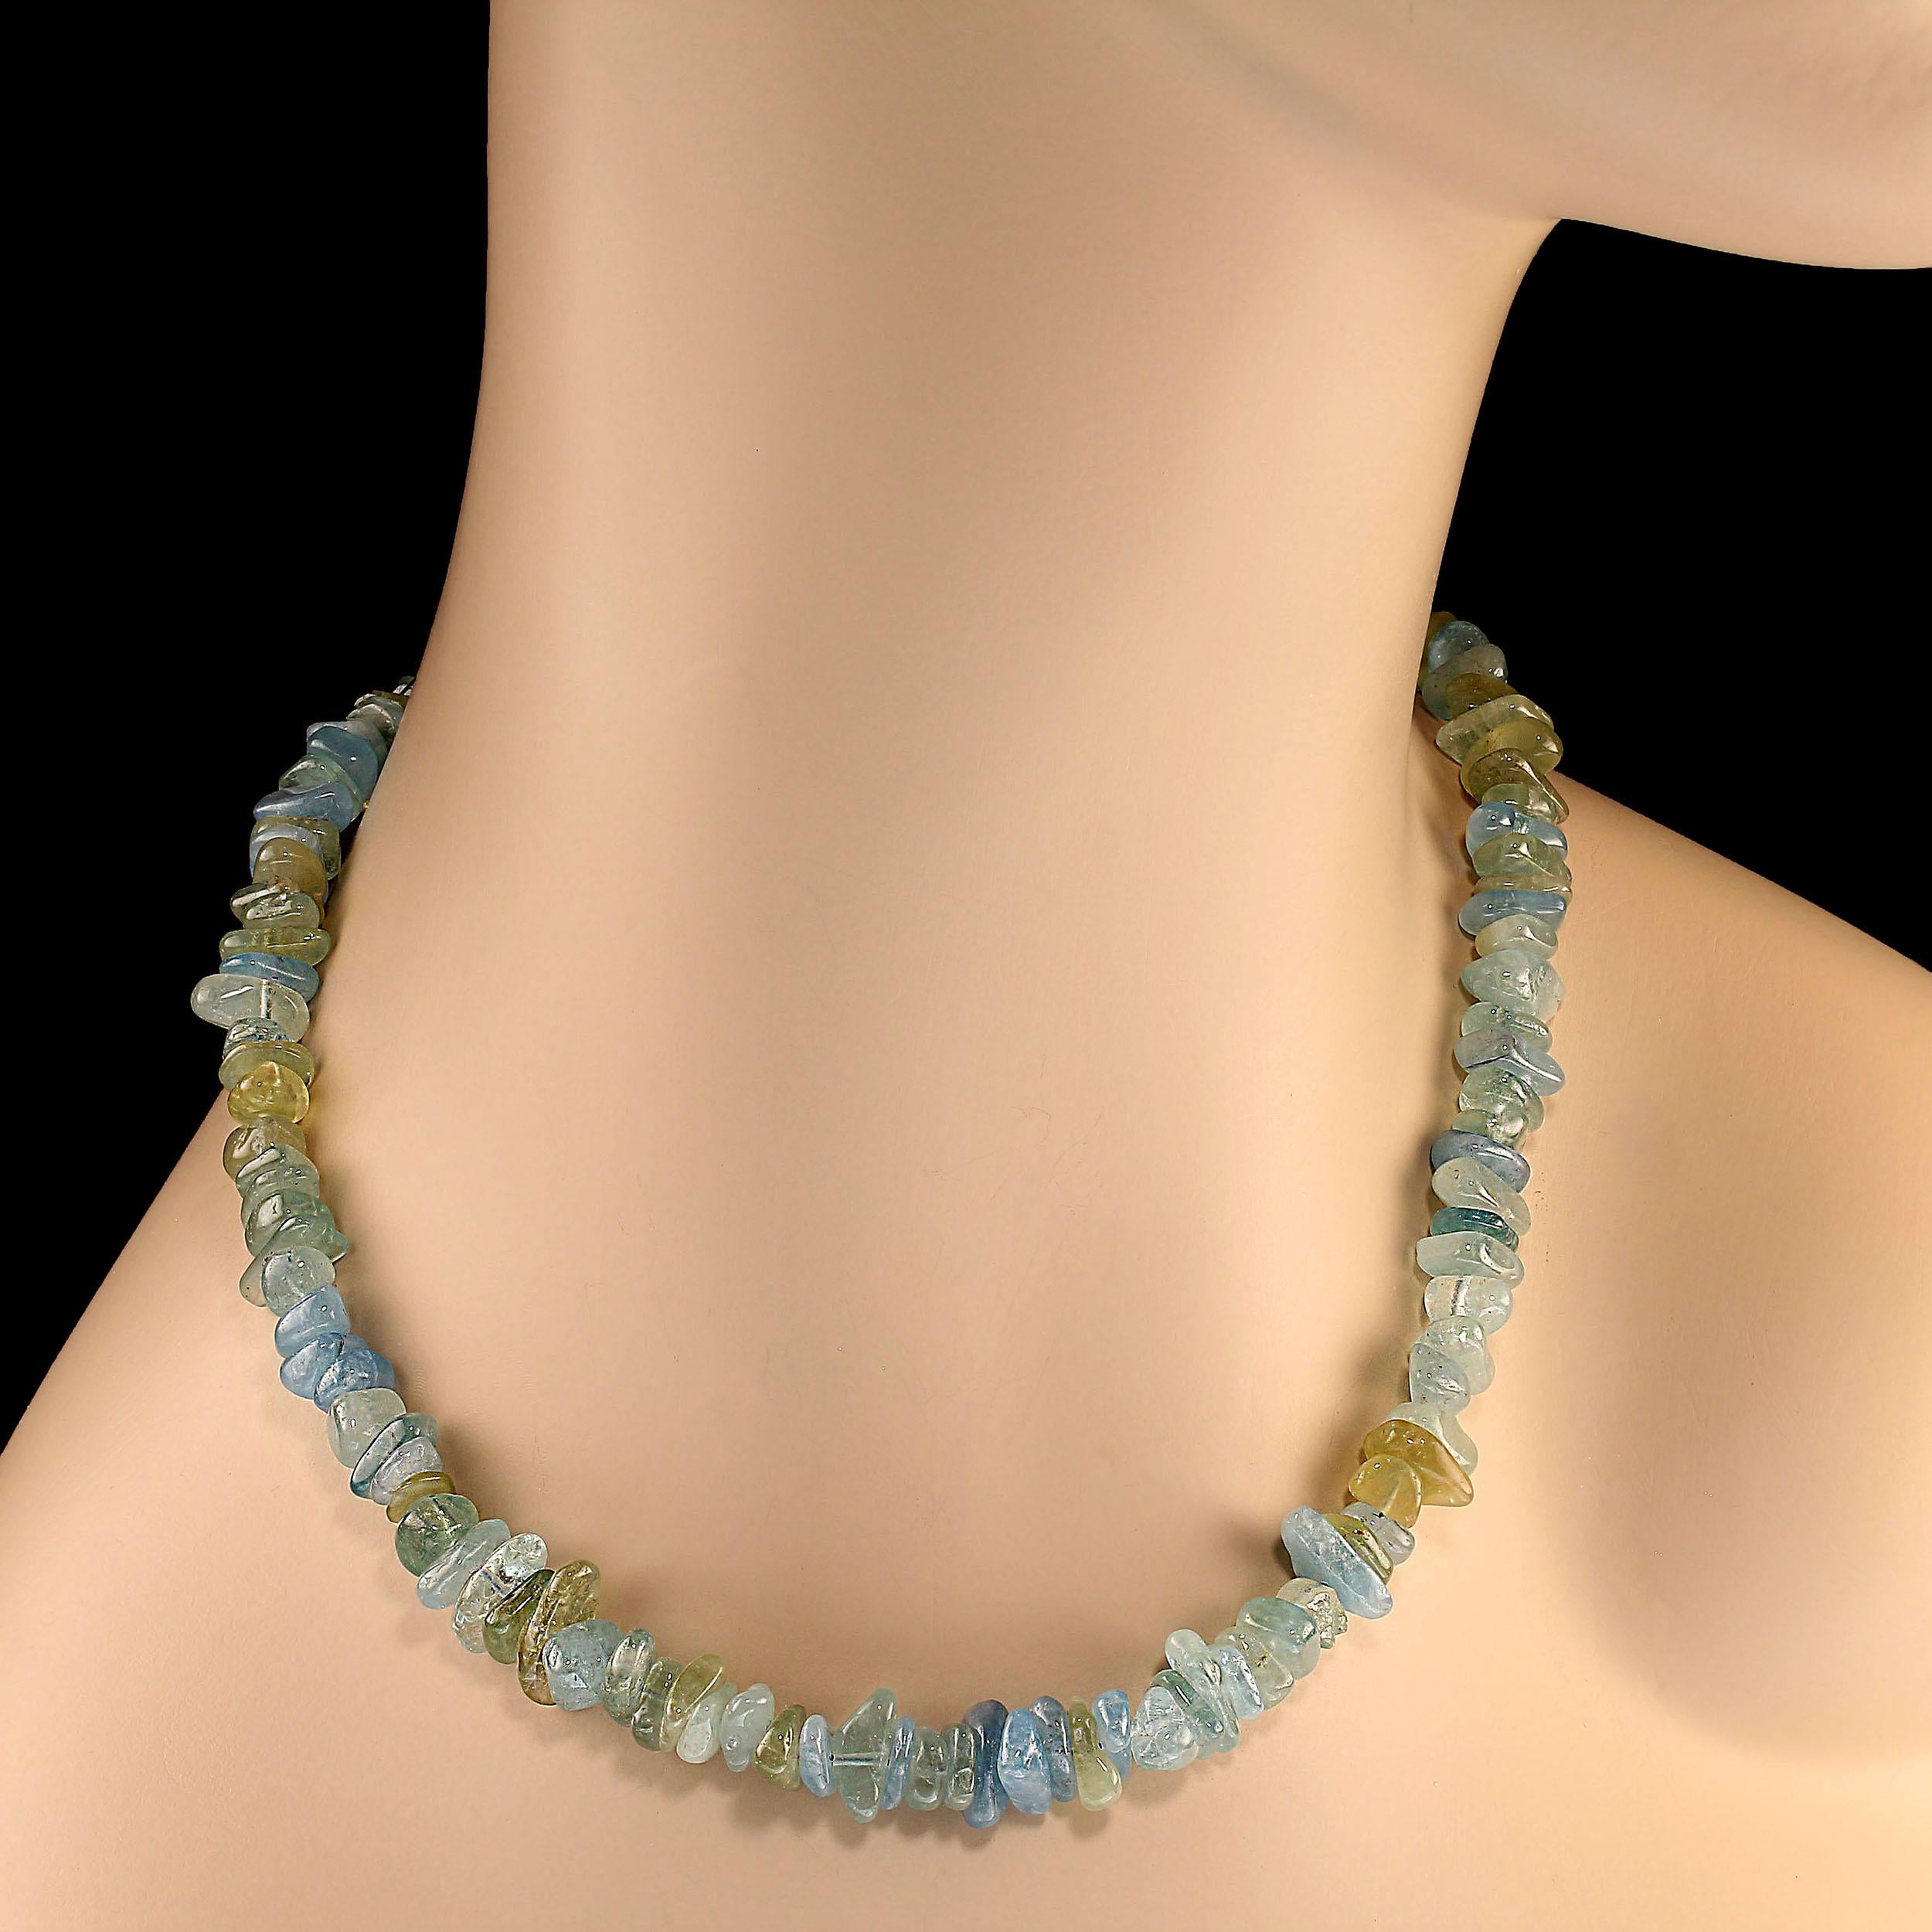 Bead AJD 18 Inch Highly Polished Blue/Green Aquamarine Chip Necklace March Birthstone For Sale